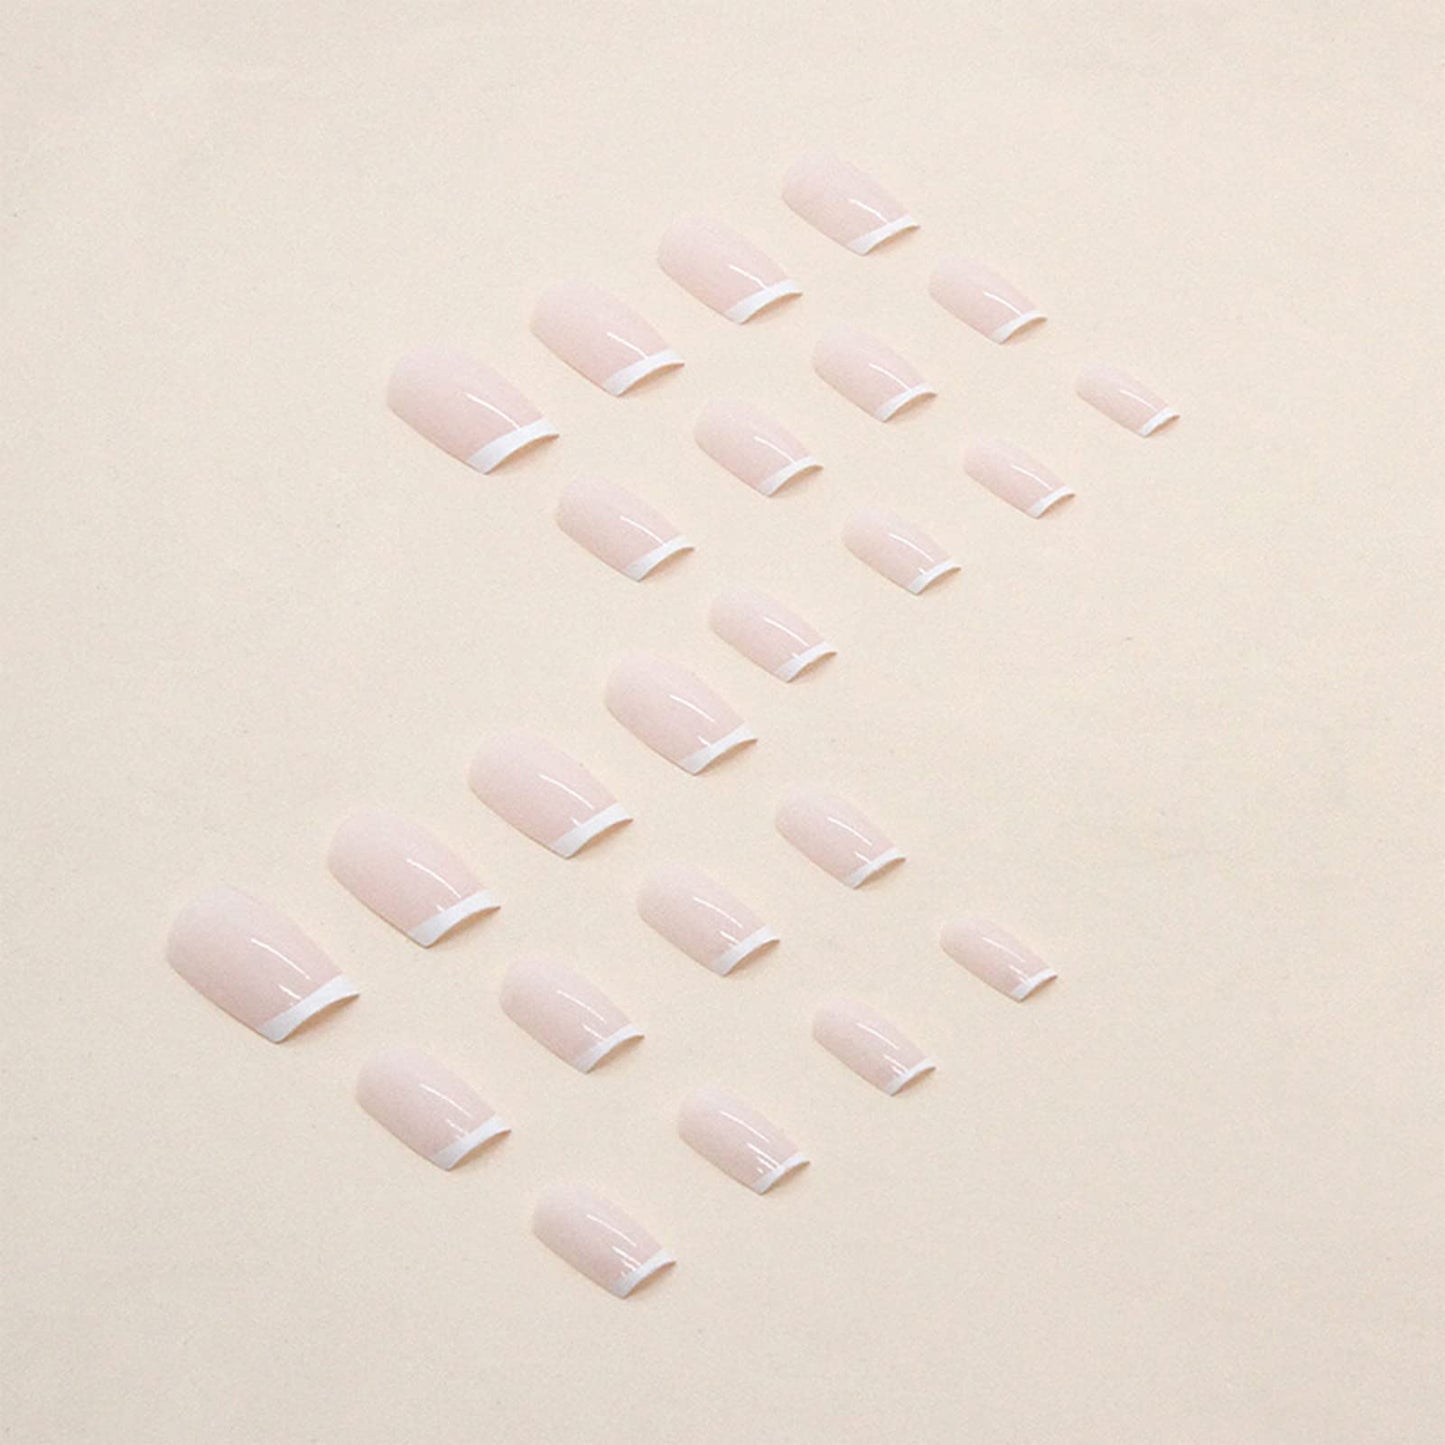 Agasar 24pcs French Tip False Nails White Stick on Nails Short Square Press on Nails Removable Glue-on Nails Fake Nails Women Girls Nail Art Accessories, Variety Pack